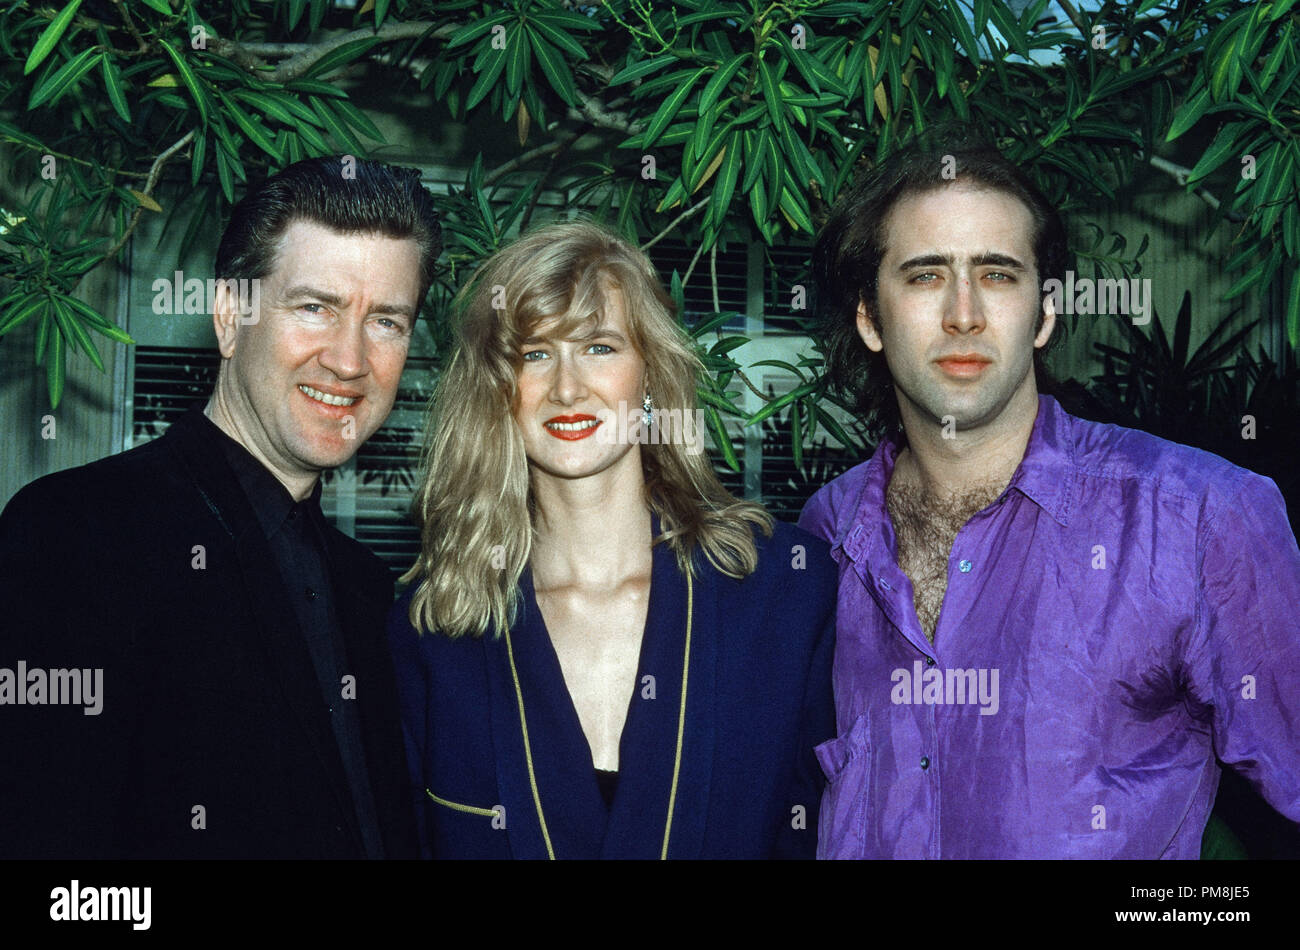 David Lynch, Laura Dern and Nicolas Cage at "Wild at Heart" Press  Conference, 1990. © JRC /The Hollywood Archive - All Rights Reserved File  Reference # 31515 397 Stock Photo - Alamy